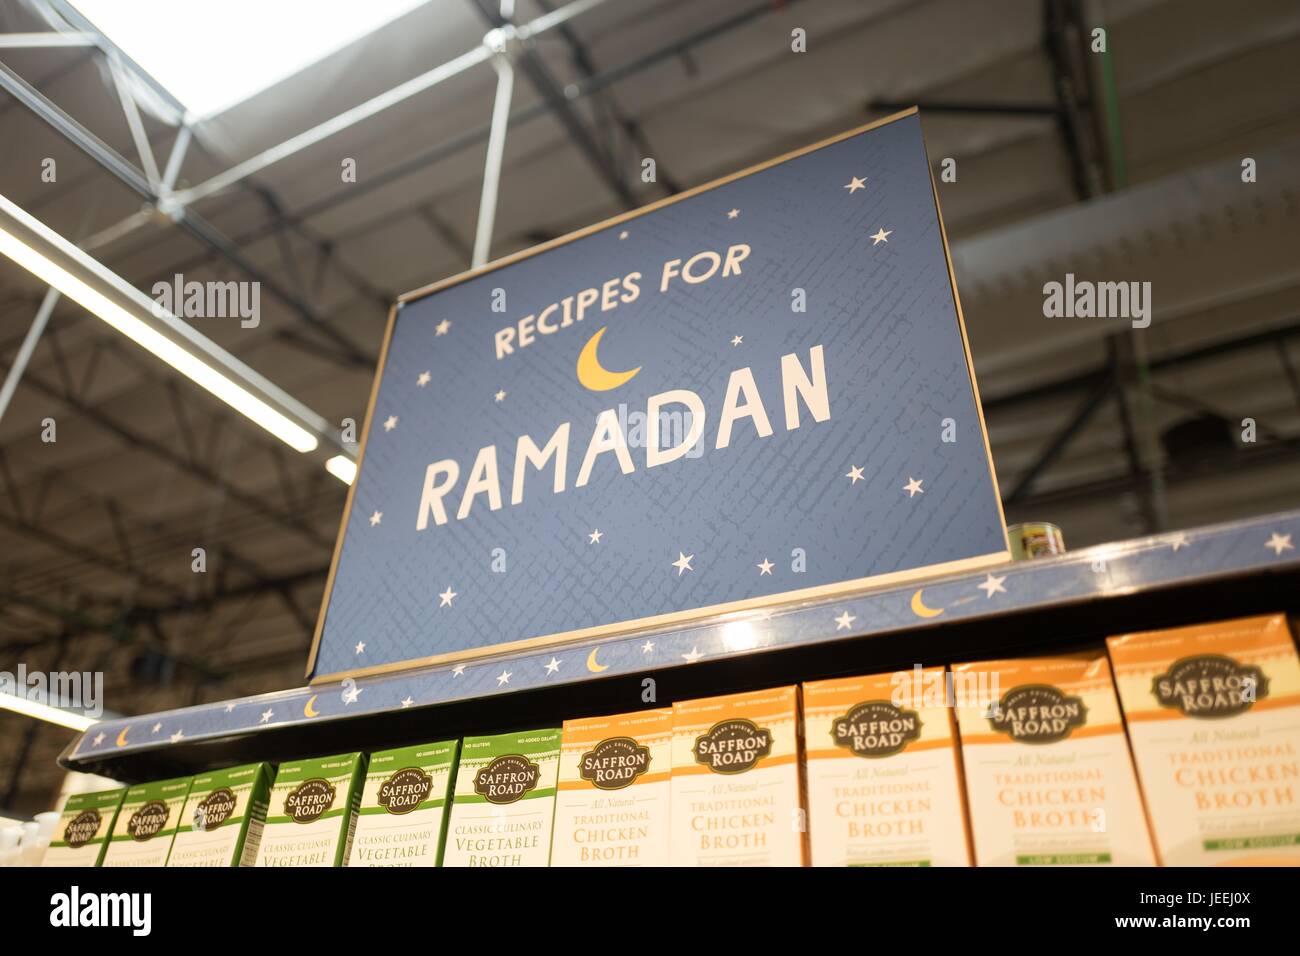 Signage advertising recipes for the Muslim holiday of Ramadan at the Whole Foods Market grocery store in Dublin, California, June 16, 2017. Stock Photo